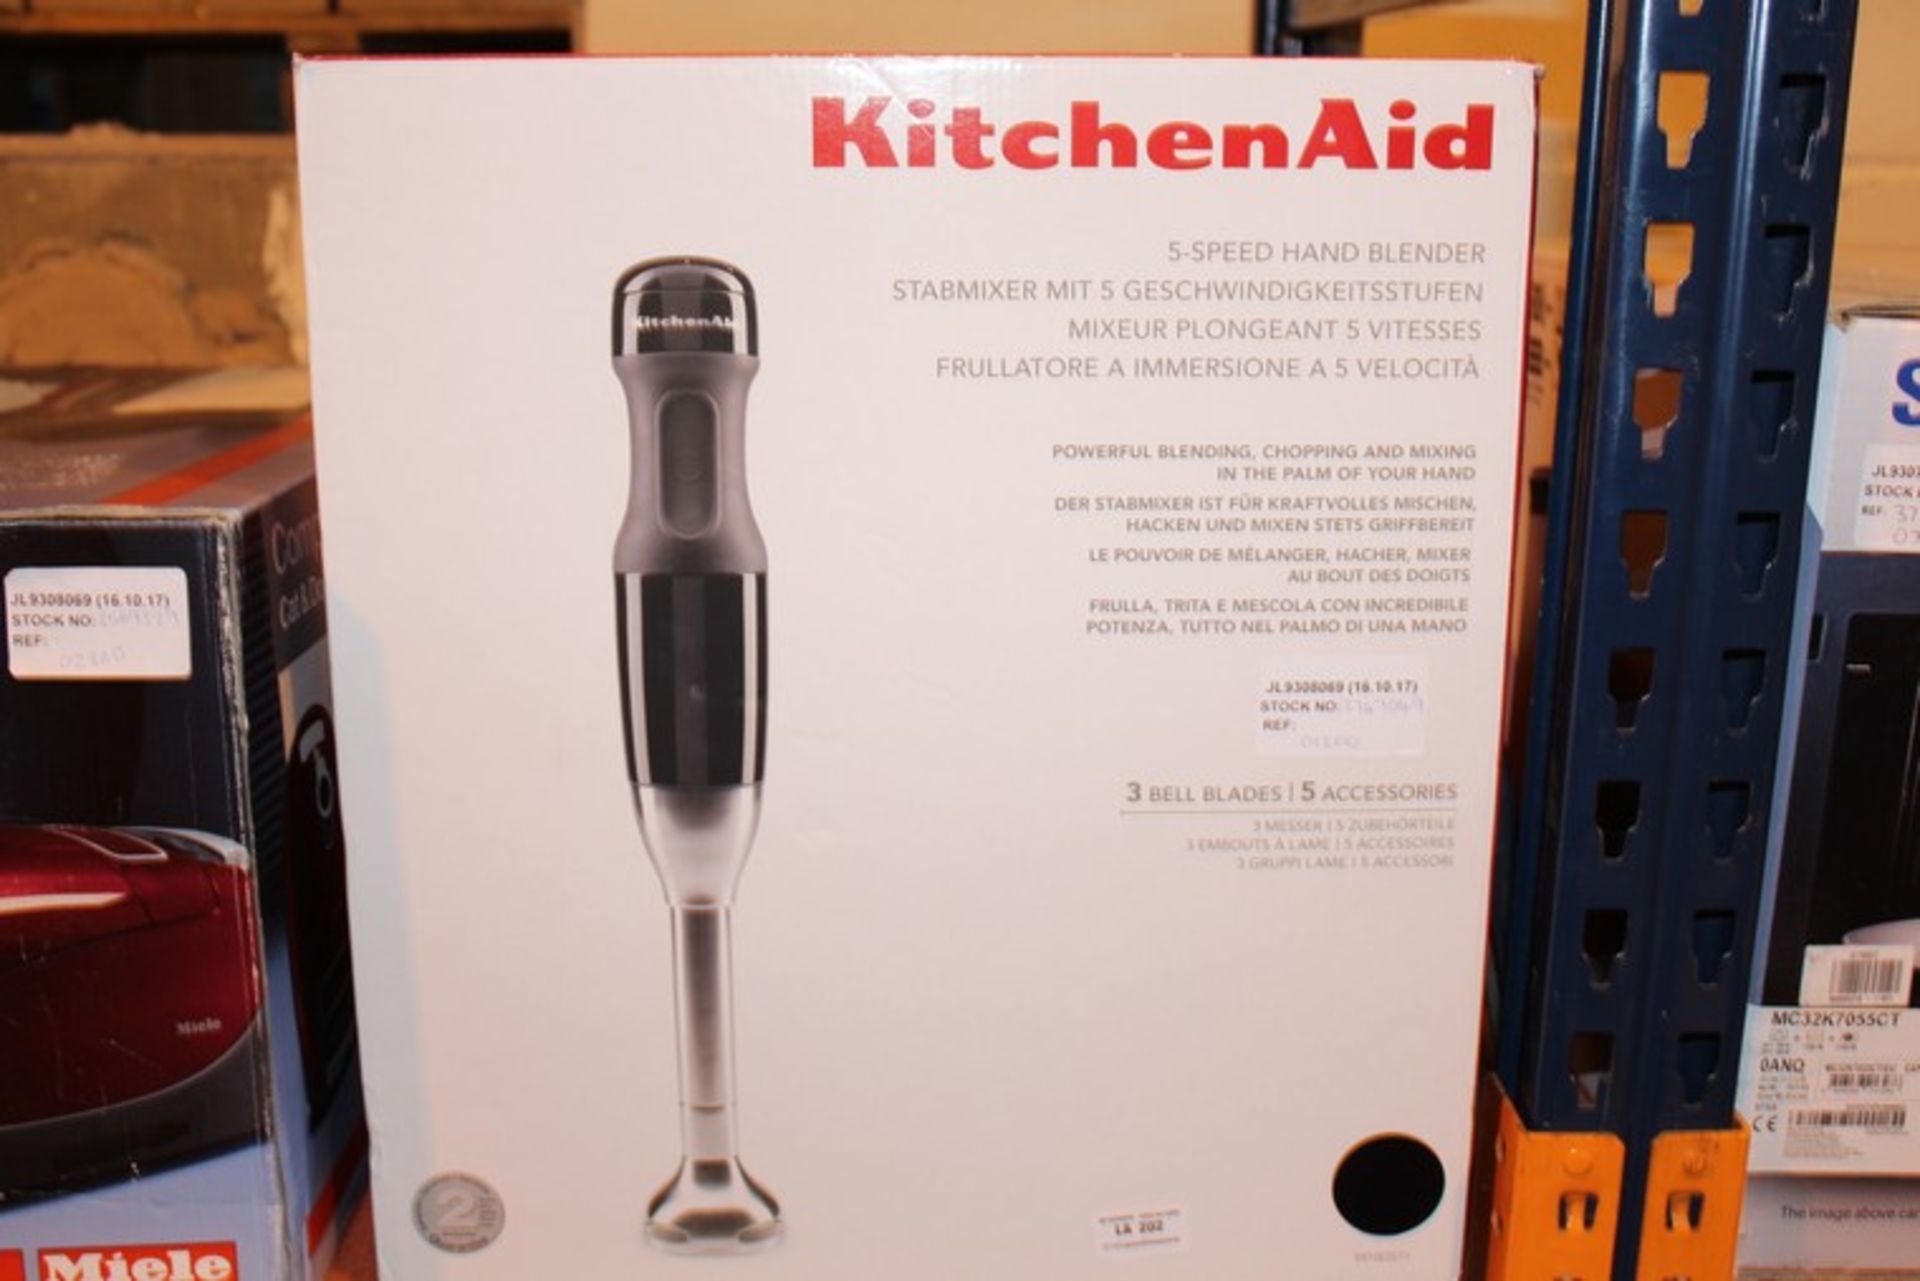 1 x BOXED KITCHEN AID 5 SPEED HAND BLENDER RRP £120 (16.10.17) (3744079) *PLEASE NOTE THAT THE BID